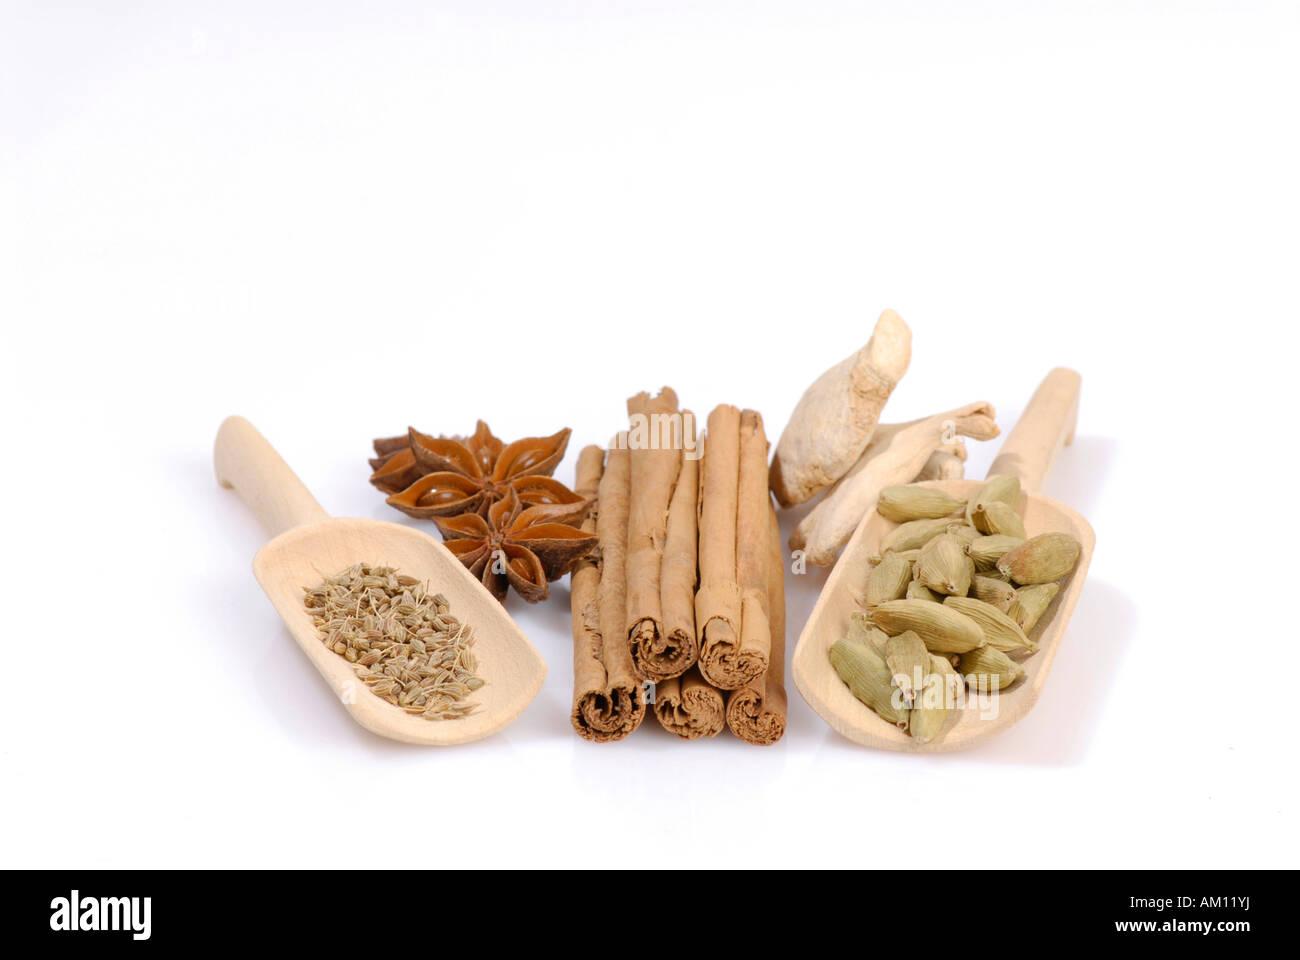 Christmassy spices Stock Photo